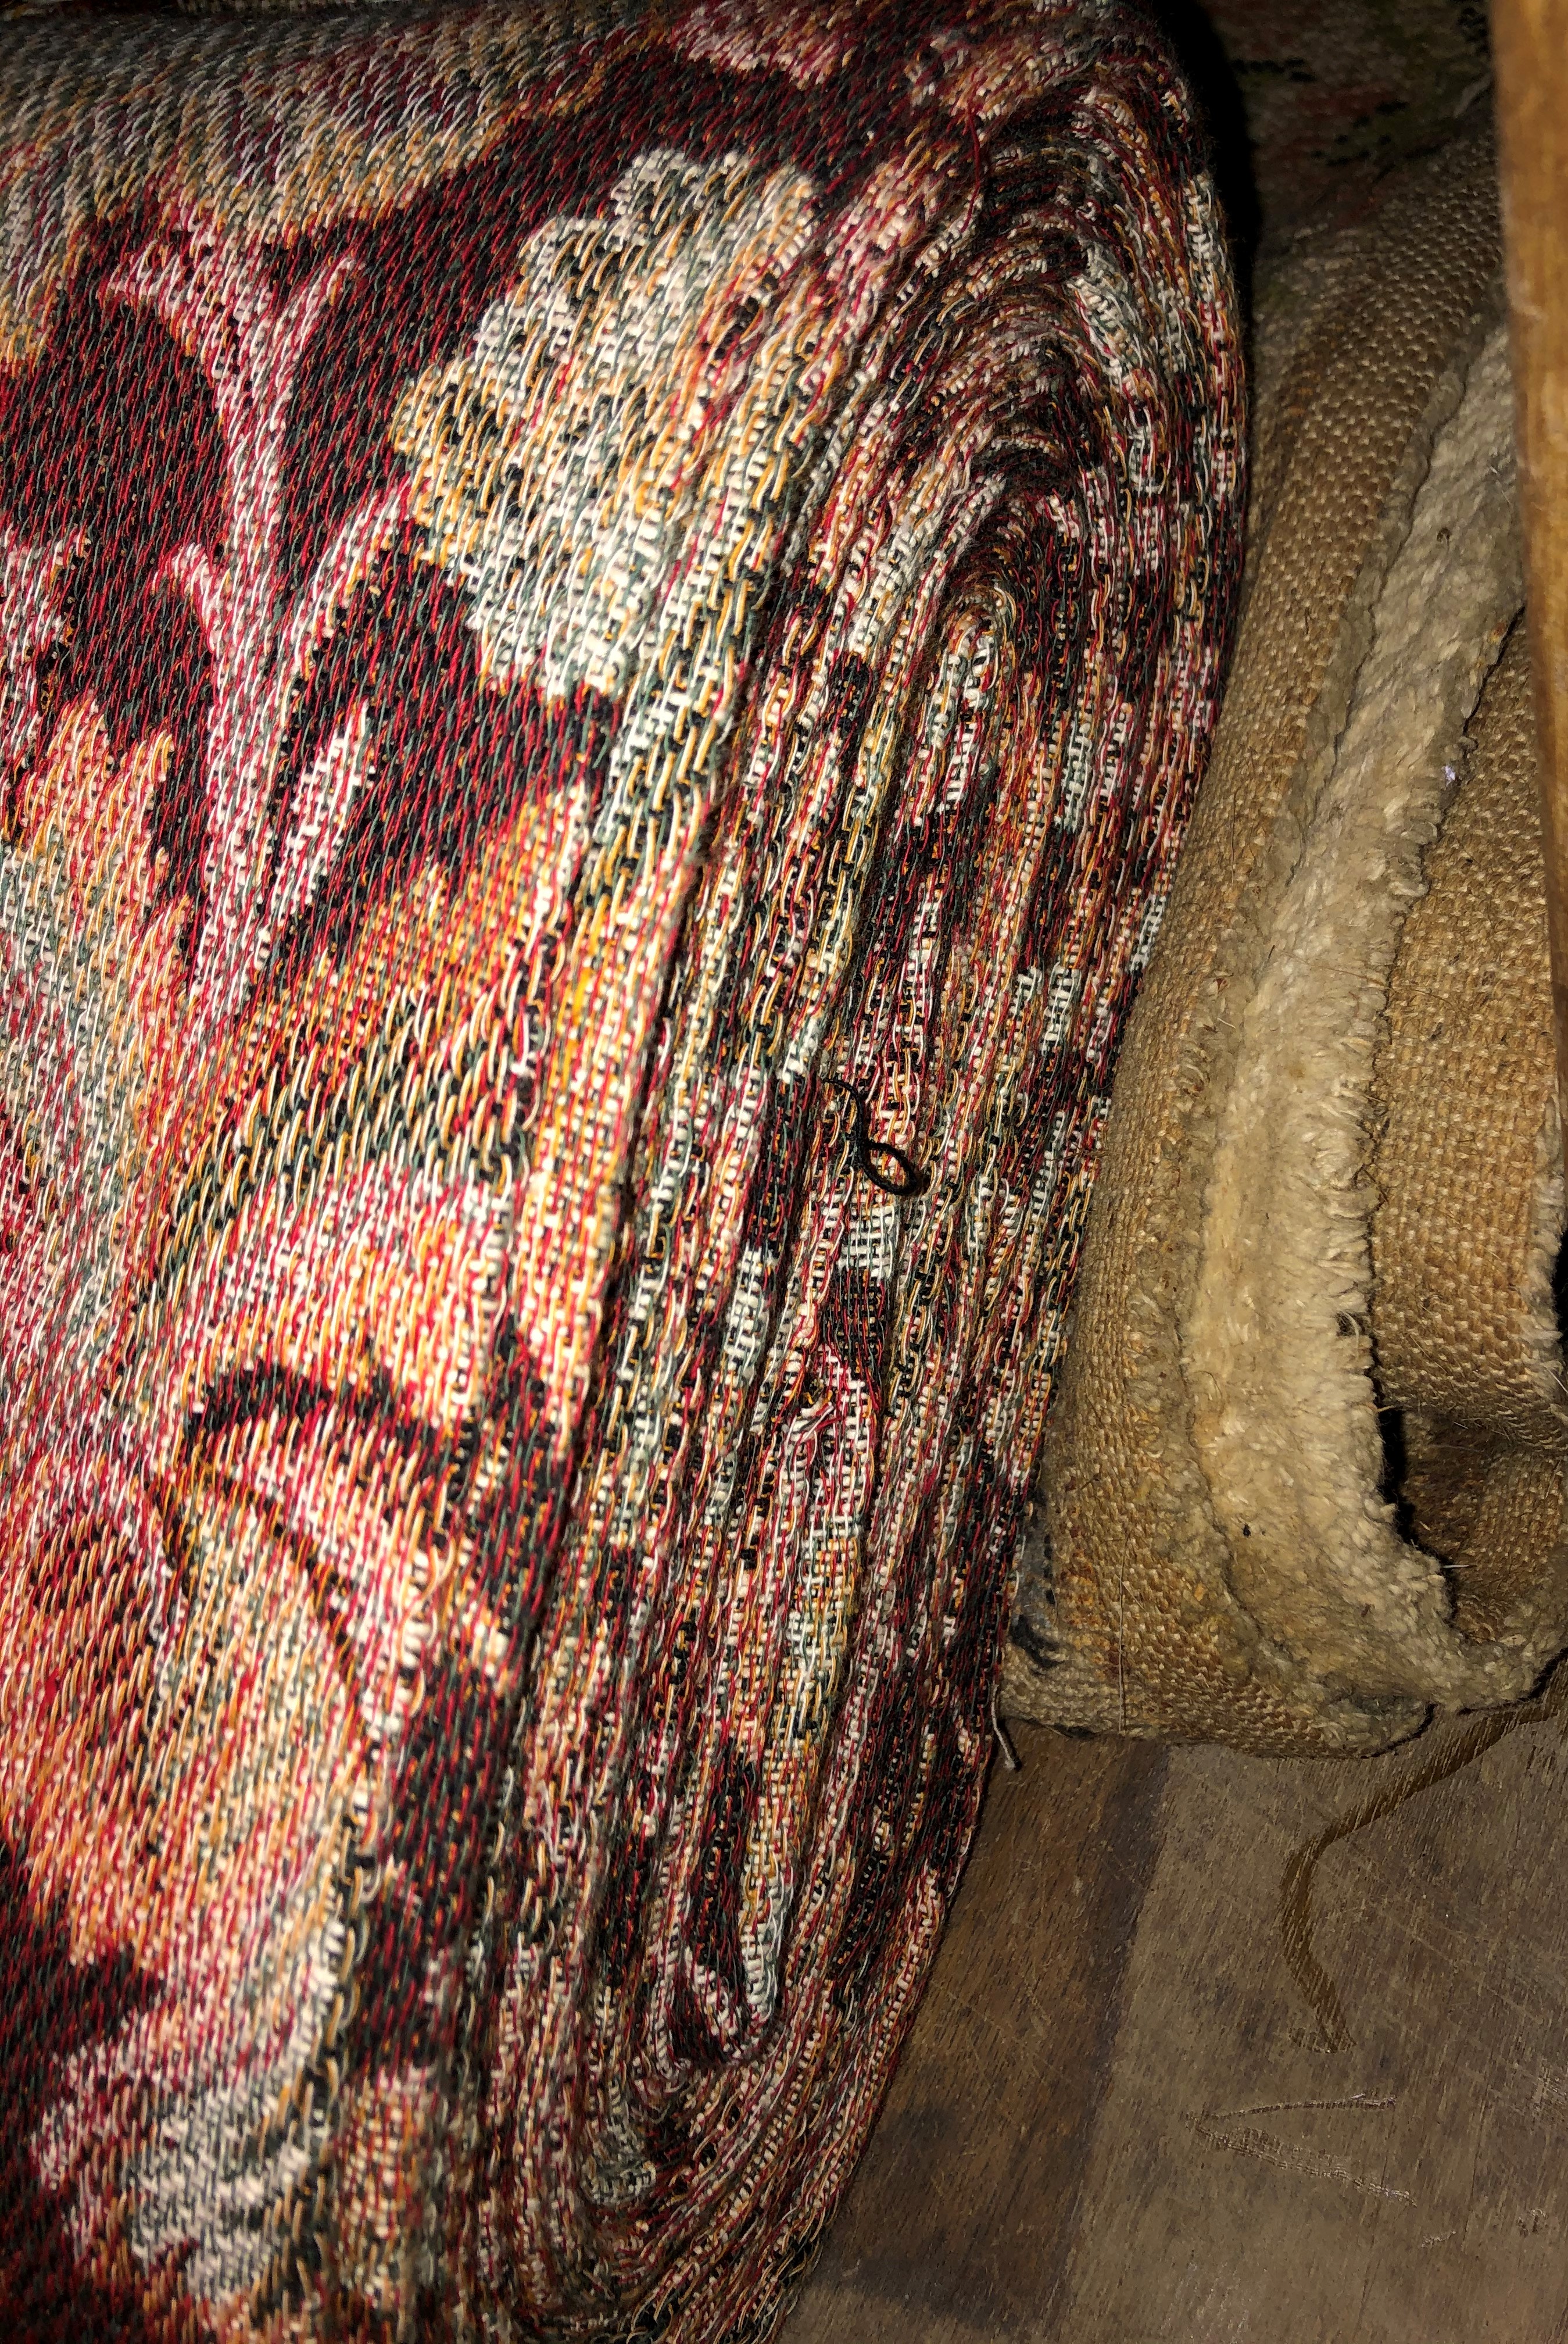 BOLT OF FLORAL FABRIC AND A RUG - Image 2 of 2